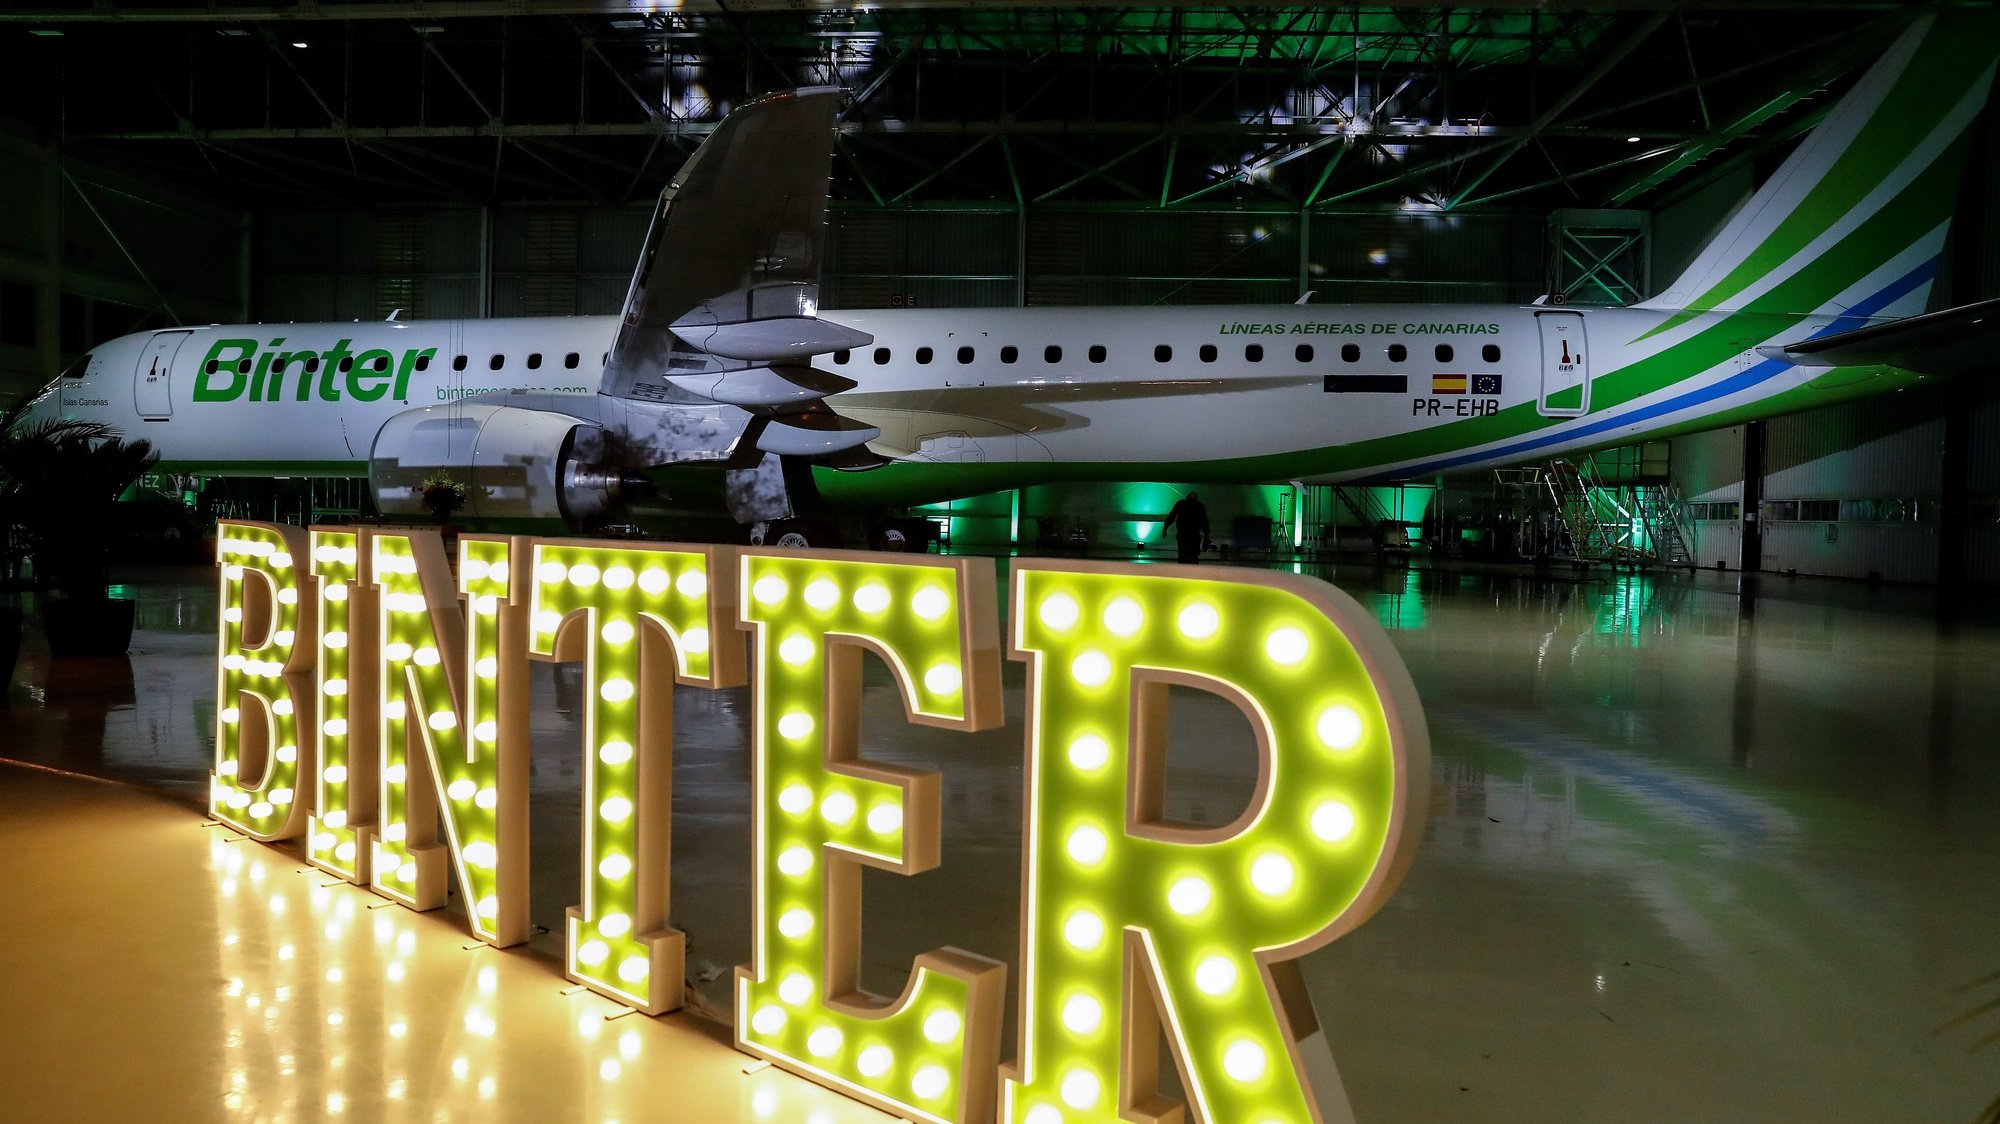 epa08016068 View of the E195-E2 aircraft produced by Brazilian aerospace conglomerate Embraer for Binter Canarias airline, at the Embraer headquarters in Sao Jose dos Campos, Brazil, 21 November 2019. The Brazilian aircraft manufacturer Embraer delivered on 21 November the first five E195-E2 aircrafts to the Spanish airline as part of Binter&#039;s plan of expanding long-distance flights.  EPA/SEBASTIAO MOREIRA